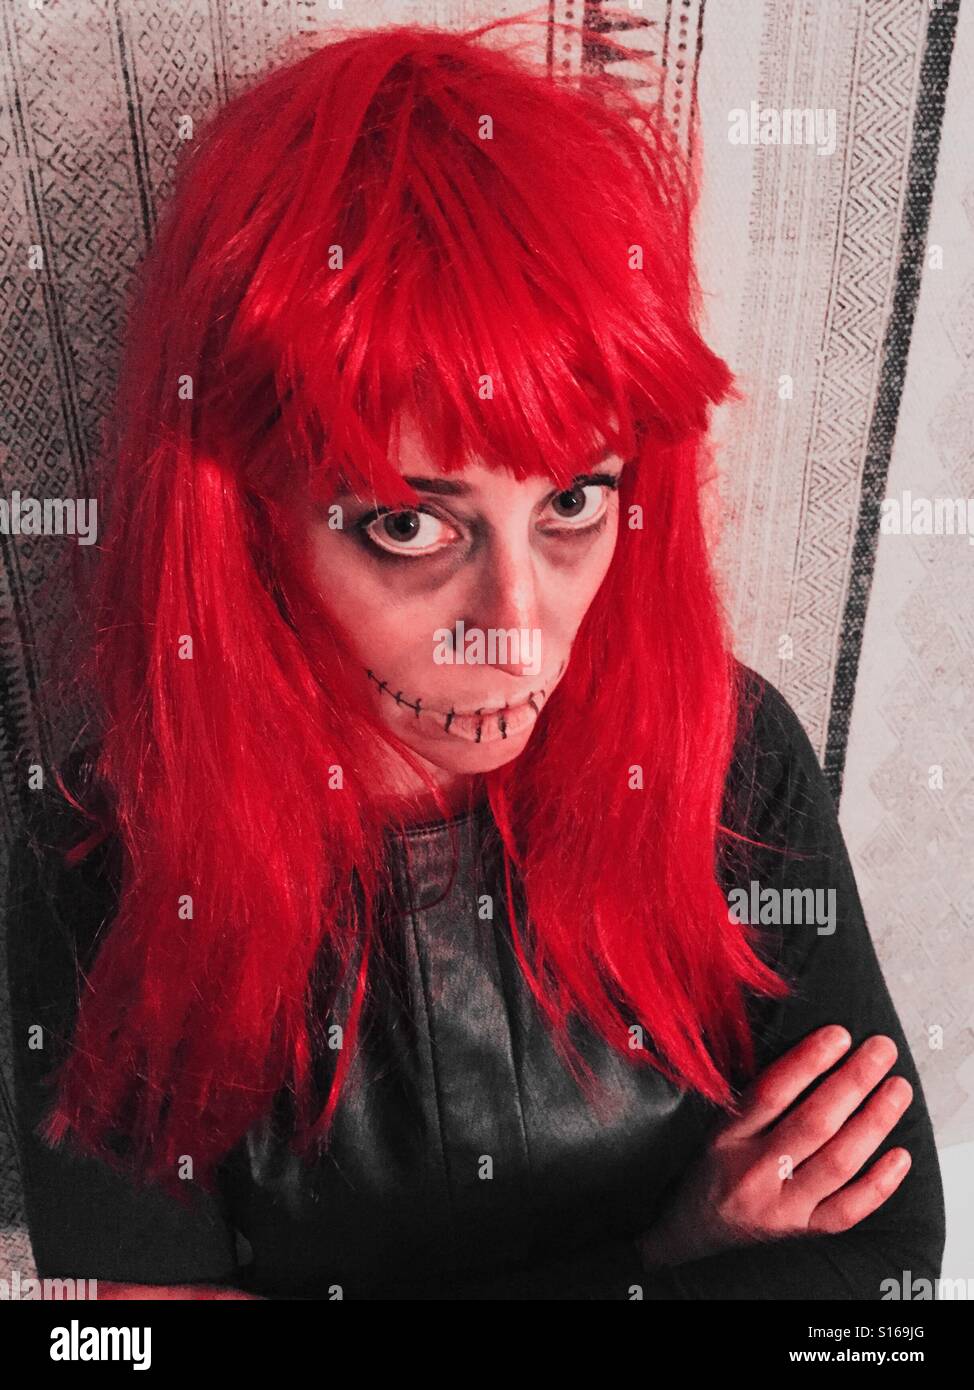 A woman with red makeup and a red face paint Image & Design ID 0000560726 